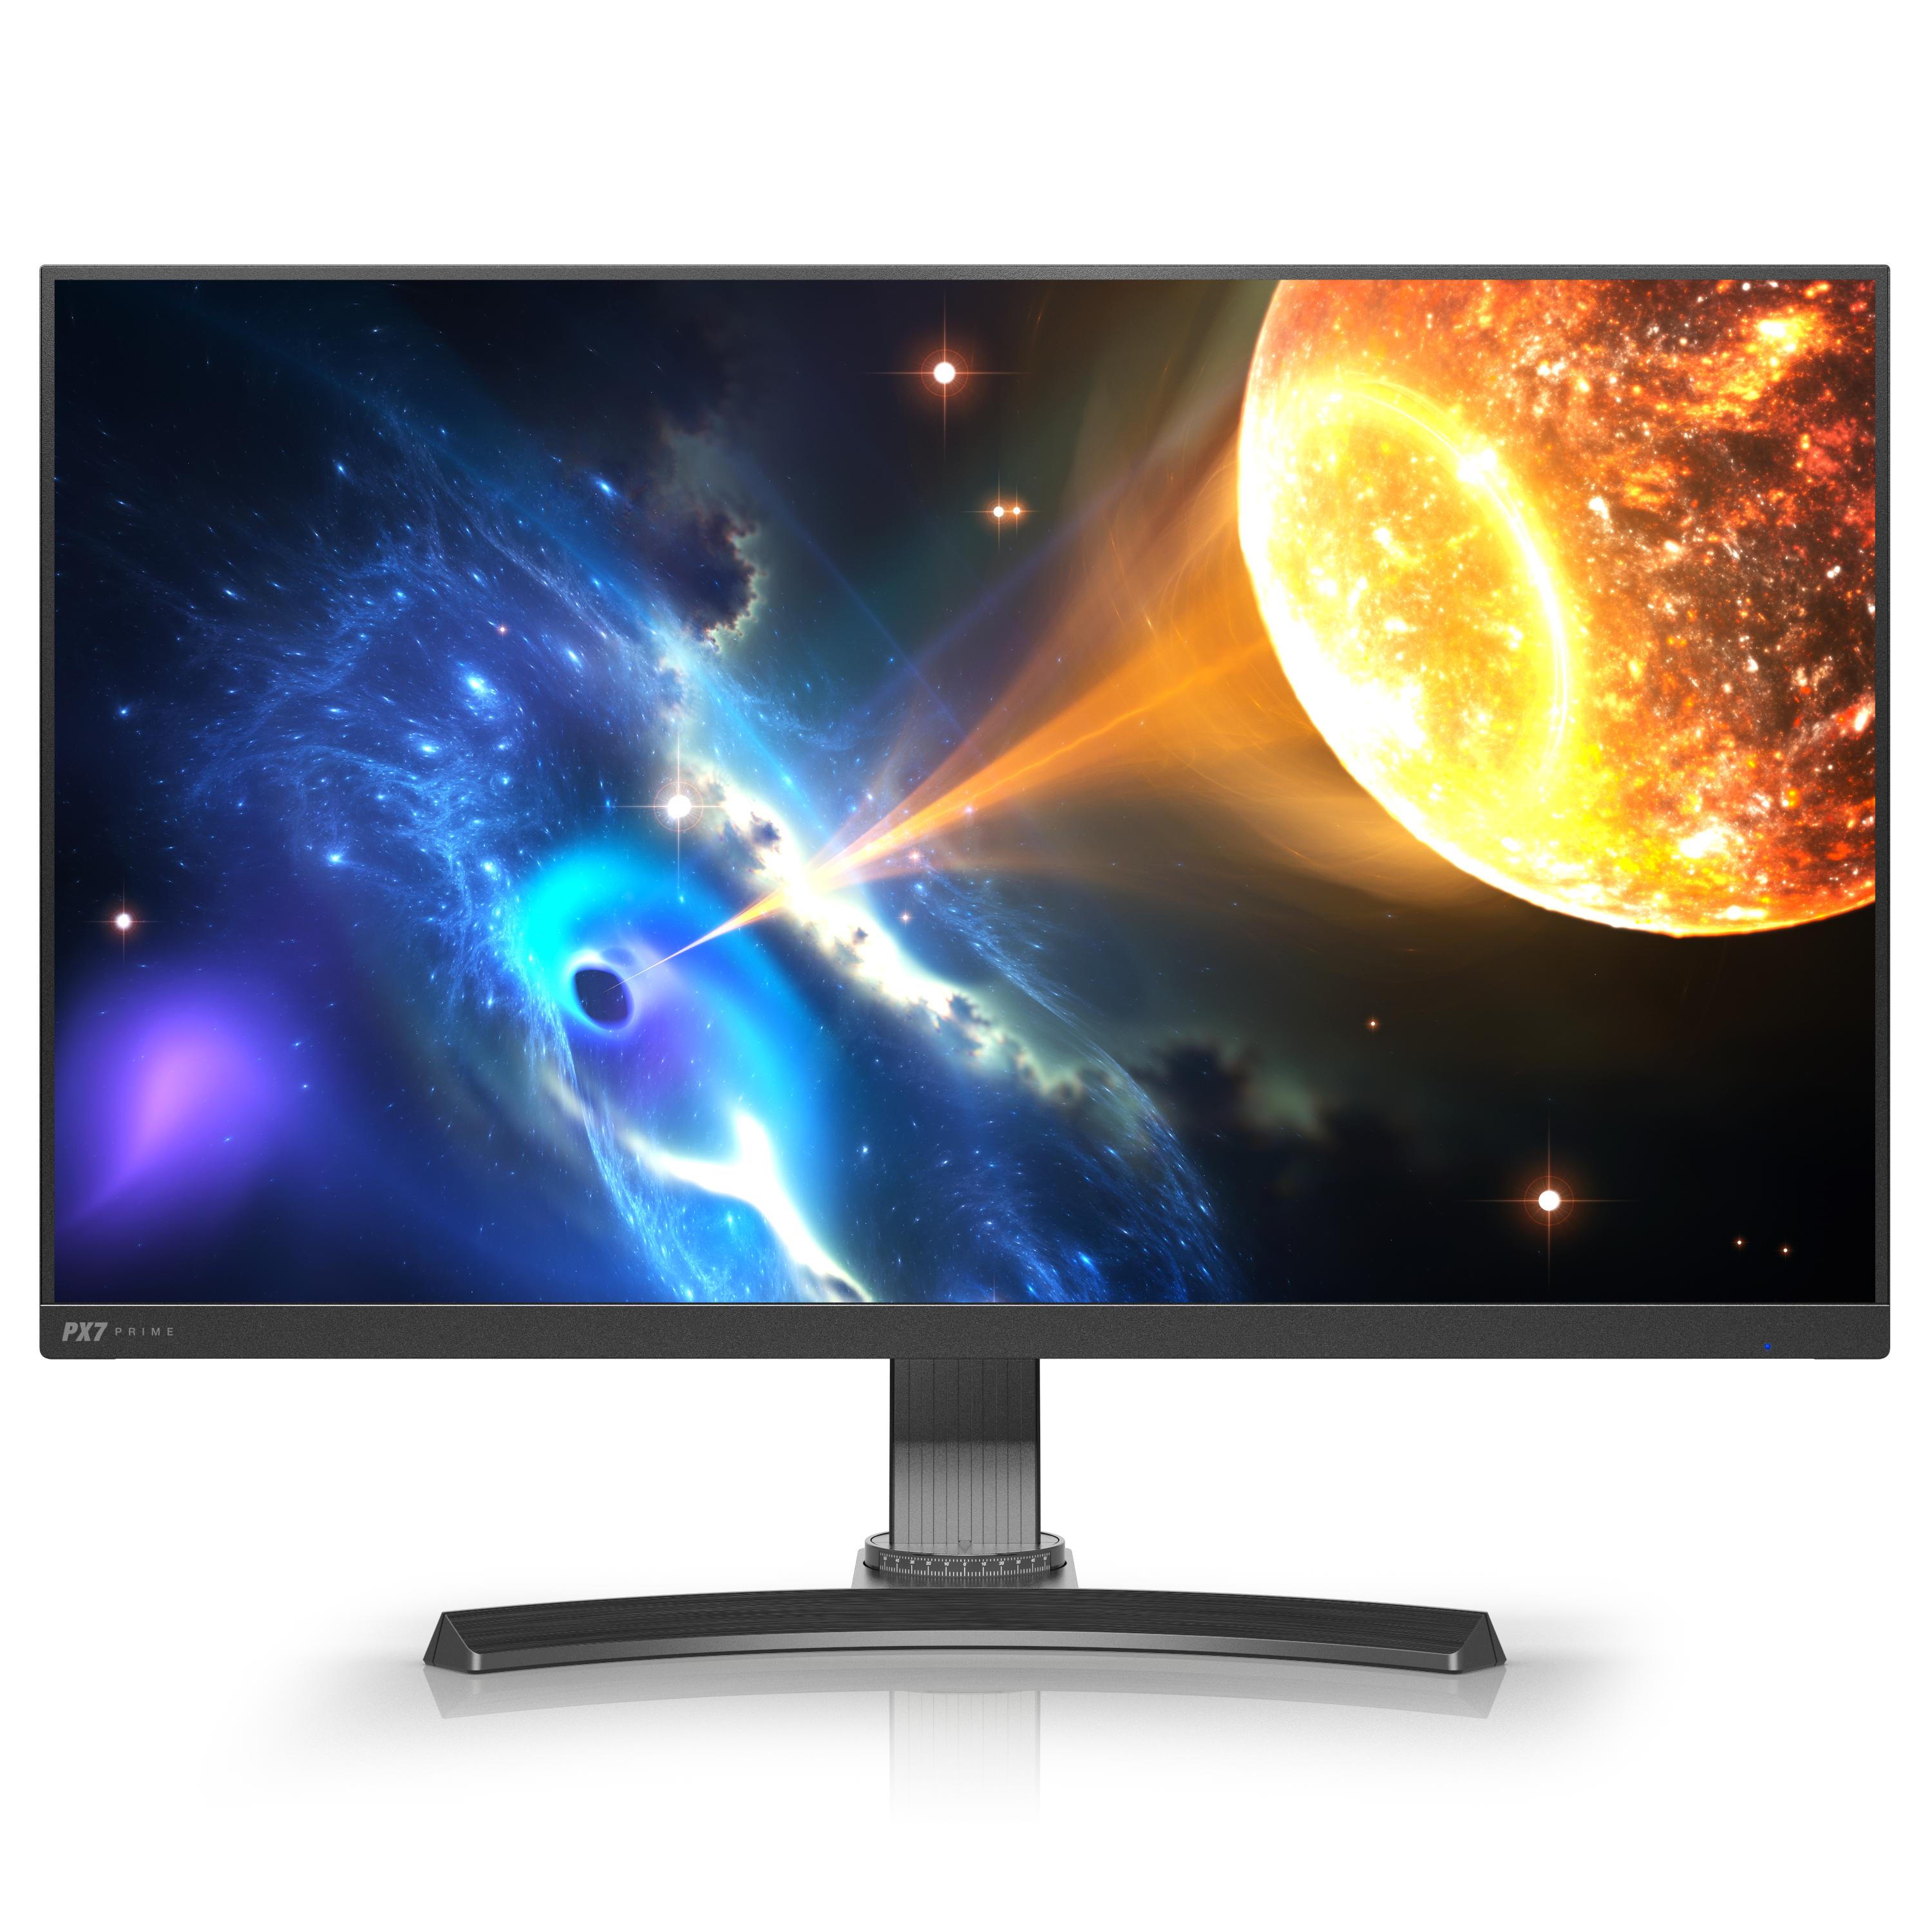 PX7 Prime Gaming Monitor